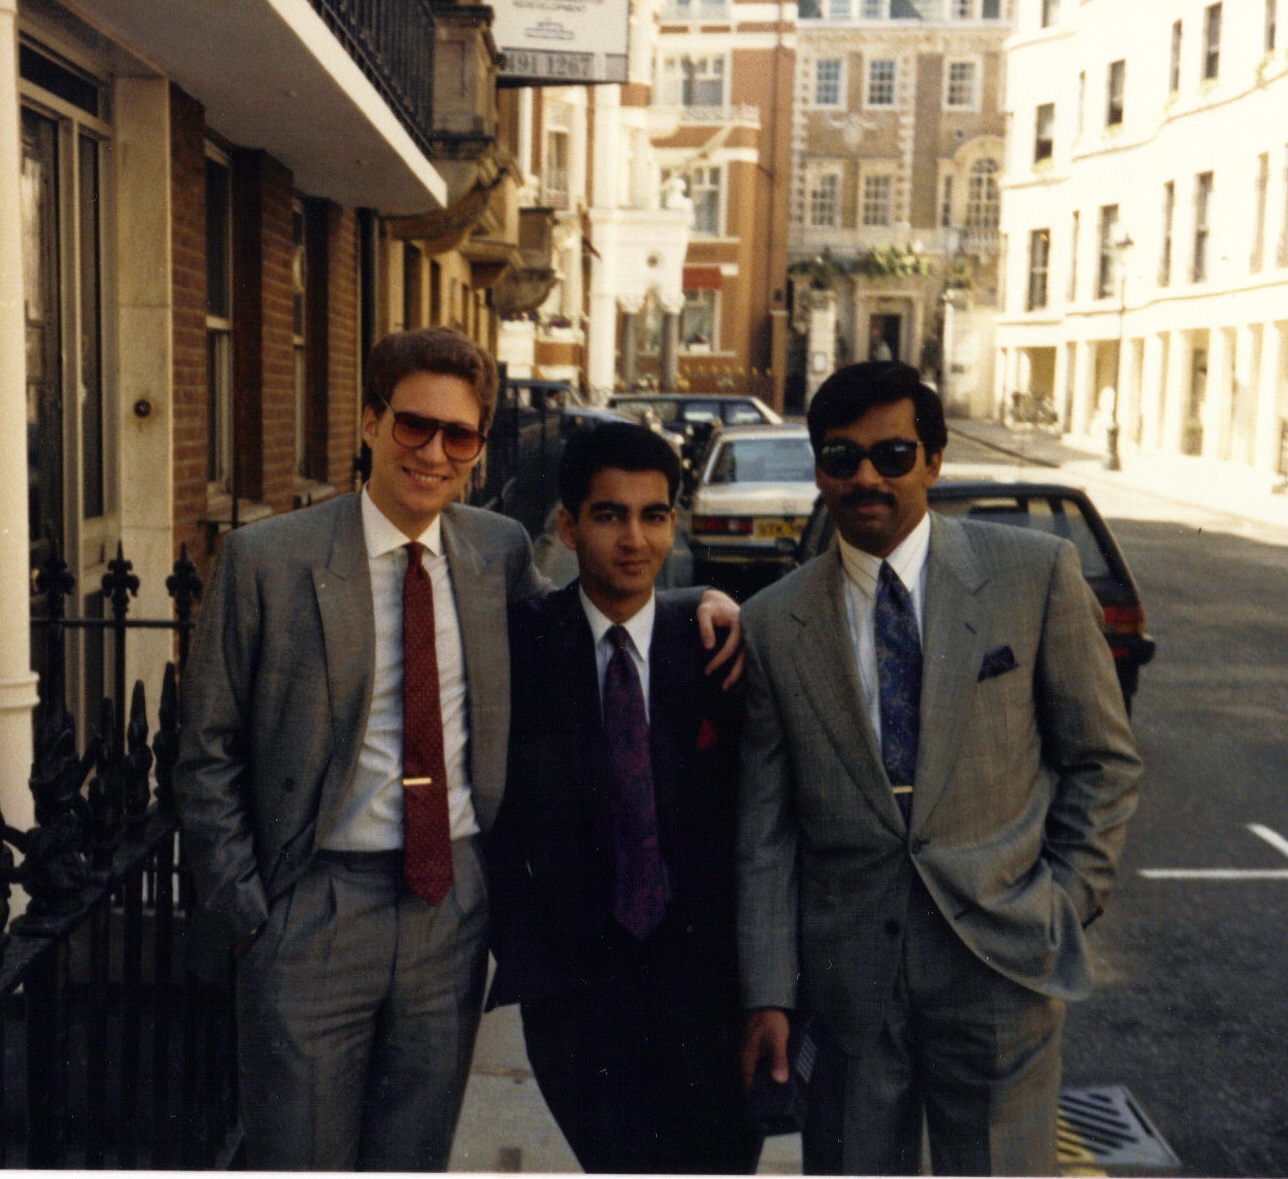 L-R; Tom Kaplan, Junaid Islam, and Timothy Hollywood Khan. Park Place after the conclusion of Merchant Ivory Agreement.